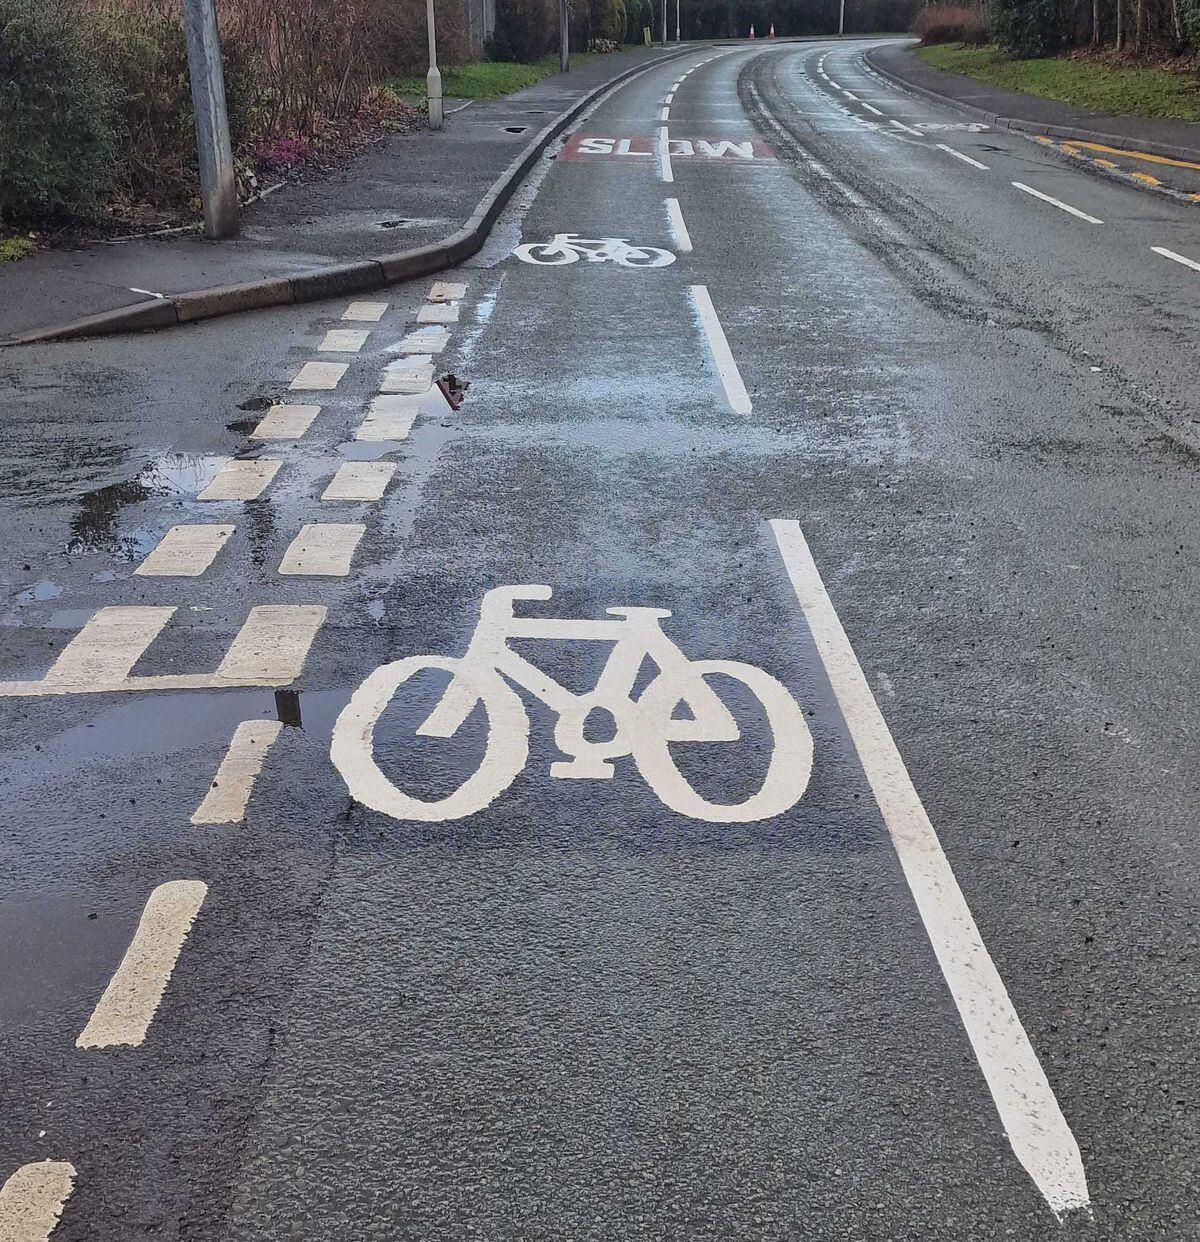 The cycle lanes as they appeared.